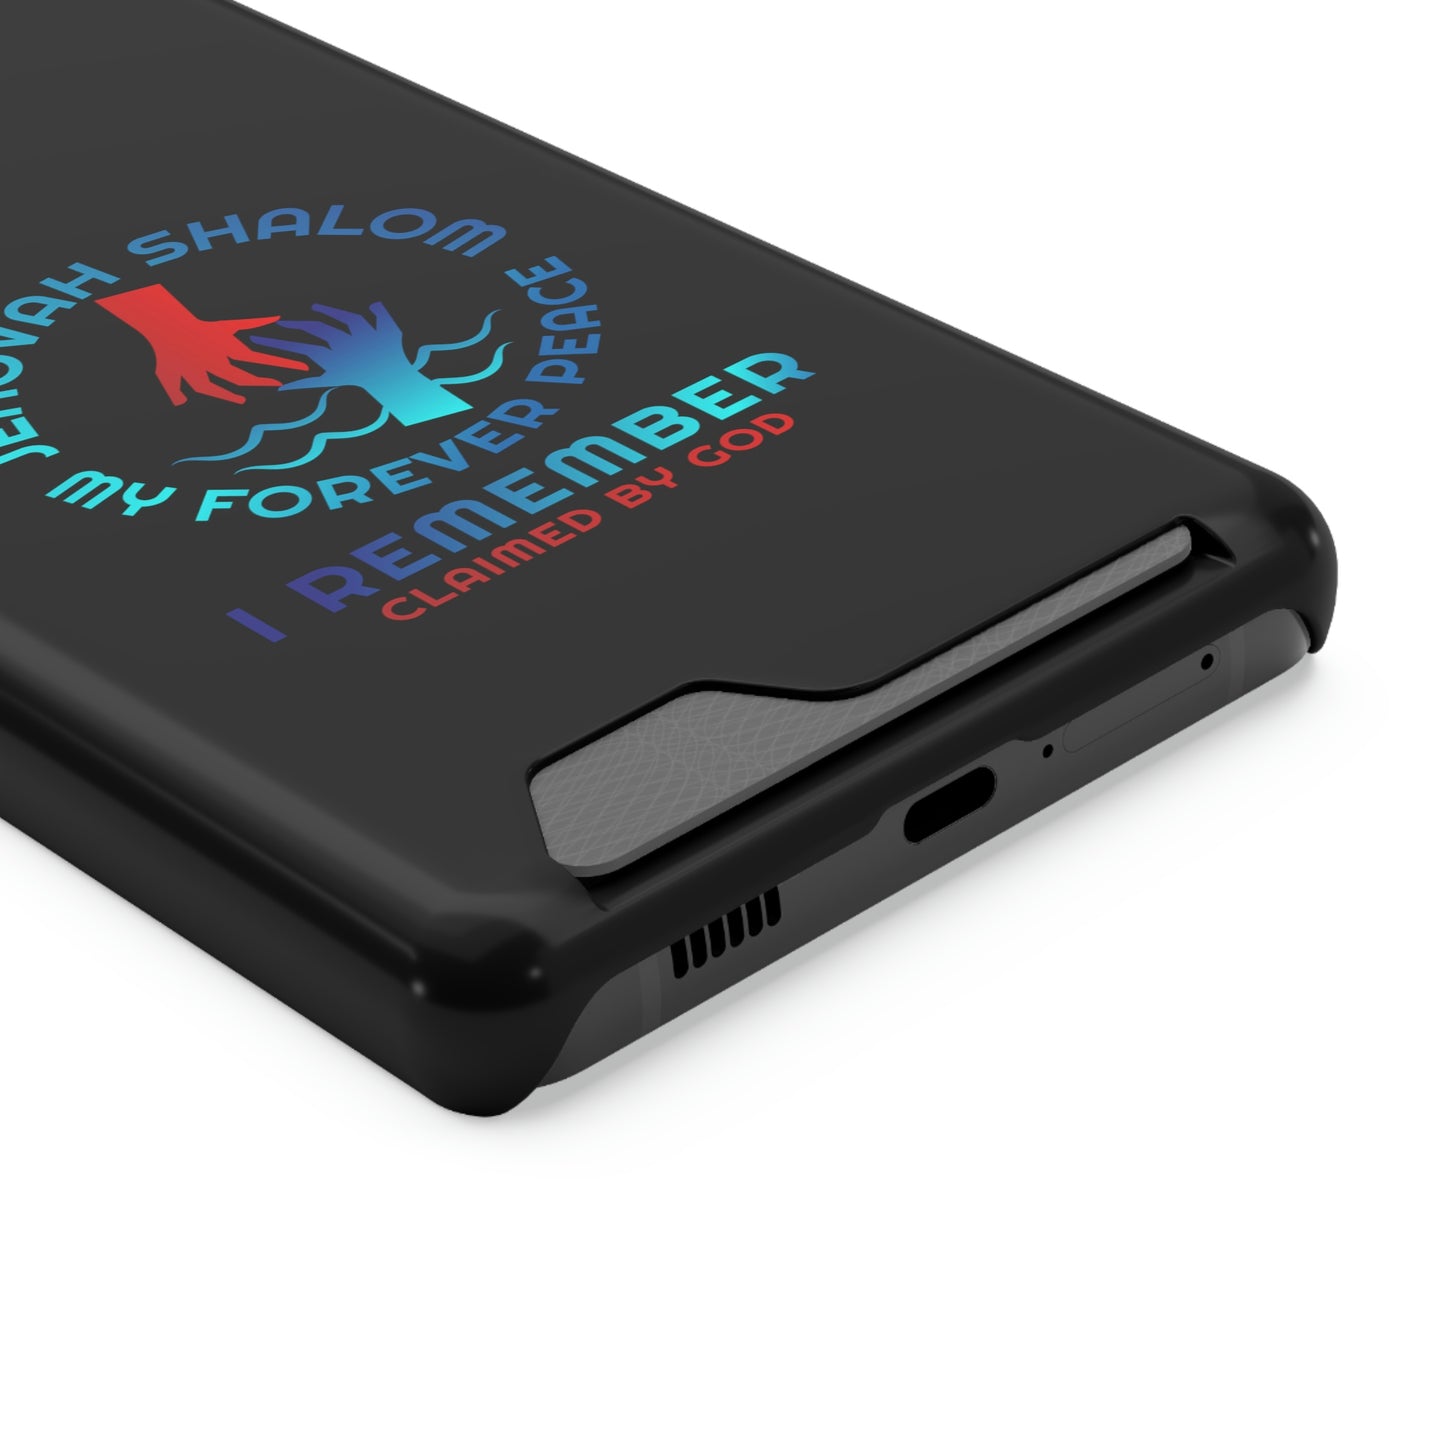 Jehovah Shalom My Forever Peace I Remember Phone Case With Card Holder